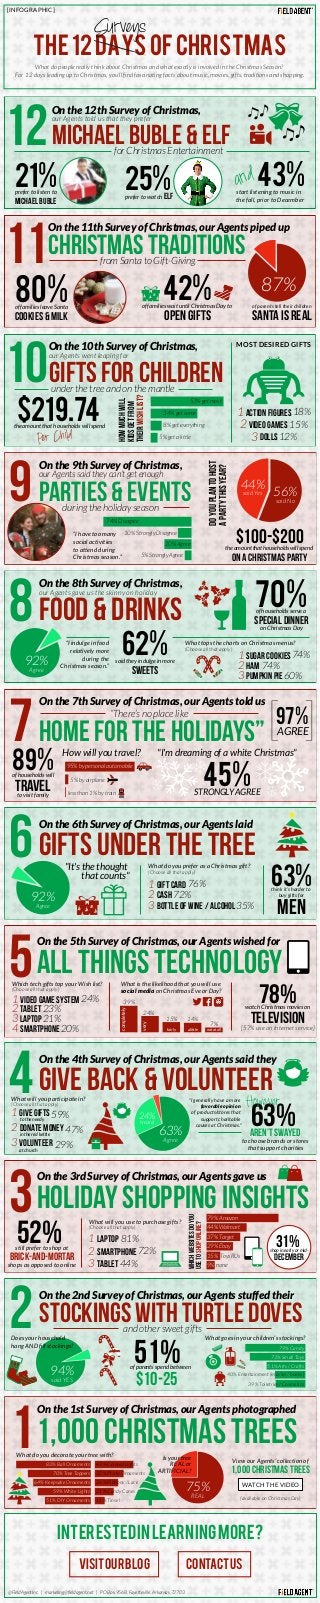 THE12daysofCHRISTMAS
Surveys
[INFOGRAPHIC]
43%start listening to music in
the fall, prior to December
and
What do people really think about Christmas and what exactly is involved in the Christmas Season?
For 12 days leading up to Christmas, you’ll ﬁnd fascinating facts about music, movies, gifts, traditions and shopping.
Michael Buble & Elf
Christmas Traditions
On the 12th Survey of Christmas,
our Agents told us that they prefer
On the 11th Survey of Christmas, our Agents piped up
12
11
for Christmas Entertainment
21%prefer to listen to
MICHAEL BUBLE
prefer to watch
25%ELF
from Santa to Gift-Giving
80%of families leave Santa
Cookies & Milk
of parents tell their children
SANTA is REAL
42%
Open gifts
87%
Parties & Events
On the 9th Survey of Christmas,
our Agents said they can’t get enough
9
Home for the HOlidays”
On the 7th Survey of Christmas, our Agents told us
7
during the holiday season
GIFTS FOR CHILDREN
On the 10th Survey of Christmas,
our Agents went leaping for
10under the tree and on the mantle
of families wait until Christmas Day to
$219.74the amount that households will spend
Per Child
MOST DESIRED GIFTS
ACTION FIGURES1 18%
Video games2 15%
Dolls3 12%
Howmuchwill
kidsgetfrom
theirWishlist?
53% get most
34% get some
8% get everything
5% get a little
Food & drinks
On the 8th Survey of Christmas,
our Agents gave us the skinny on holiday
8
Gifts under the Tree
On the 6th Survey of Christmas, our Agents laid
6
Give Back & Volunteer
On the 4th Survey of Christmas, our Agents said they
4
stockings with turtle doves
On the 2nd Survey of Christmas, our Agents stuffed their
2
70%
SPECIAL DINNER
of households serve a
on Christmas Day
$100-$200the amount that households will spend
on a Christmas party
Doyouplantohost
apartythisyear?
44%
said Yes 56%
said No
“I have too many
social activities
to attend during
Christmas season.”
74% Disagree
10% Strongly Disagree
20% Agree
5% Strongly Agree
“I indulge in food
relatively more
during the
Christmas season.”92%
Agree
62%
SWEETS
said they indulge in more
What tops the charts on Christmas menus?
(Choose all that apply)
sugar cookies1
2 Ham
3 Pumpkin pie
74%
74%
60%
“There’s no place like
All things Technology
On the 5th Survey of Christmas, our Agents wished for
5
holiday shopping insights
On the 3rd Survey of Christmas, our Agents gave us
3
1,000 Christmas Trees
On the 1st Survey of Christmas, our Agents photographed
1
97%
AGREE[ ]
89%
to visit family
of households will
TRAVEL
95% by personal automobile
5% by airplane
less than 1% by train
How will you travel?
45%STRONGLY AGREE
"I'm dreaming of a white Christmas"
"It's the thought
that counts"
92%
Agree
What do you prefer as a Christmas gift?
(Choose all that apply)
Gift Card1
2 Cash
3 bottle of wine / alcohol
76%
72%
35%
63%think it’s harder to
buy gifts for
Men
Which tech gifts top your Wish list?
(Choose all that apply)
Video Game System1 24%
2 Tablet 23%
Laptop21%3
Smartphone20%4
78%
TELEVISION
watch Christmas movies on
[57% use an Internet service]
What is the likelihood that you will use
social media on Christmas Eve or Day?
39%
24%
15% 14%
7%
completely
very
not at alla littlefairly
What will you participate in?
(Choose all that apply)
59%
47%
29%
"I generally have a more
favorable opinion
of products/stores that
support charitable
causes at Christmas."
Give Gifts1 to the needy
2 donate money
in the red kettle
volunteer3
at church
63%
Agree
24%
Neutral
to choose brands or stores
that support charities
63%aren’t swayed
However
still prefer to shop at
52%
Brick-and-Mortar
shops as opposed to online
What will you use to purchase gifts?
(Choose all that apply)
81%Laptop1
44%TAblet3
2 Smartphone 72%
WhichWebsitesDoyou
usetoshoponline?
79% Amazon
44% Walmart
37% Target
29% Ebay
15% ToysRUs
9% none
shop in early or mid-
31%
DECEMBER
94%
said YES
Does your household
hang AND ﬁll stockings?
and other sweet gifts
What goes in your children’s stockings?
39% Toiletries / Cosmetics
40% Entertainment (movies / books)
51% Arts / Crafts
73% Small Toys
79% Candy
of parents spend between
51%
$10-25
75%
REAL
What do you decorate your tree with? Is your tree
REAL or
ARTIFICIAL?
View our Agents’ collection of
1,000 Christmas Trees
WATCH THE VIDEO
Interestedinlearningmore?
VISITOURBLOG
@FieldAgentInc | marketing@ﬁeldagent.net | PO Box 9568, Fayetteville, Arkansas 72703
CONTACTUS
51% DIY Ornaments
59% White Lights
64% Keepsake Ornaments
70% Tree Toppers
83% Ball Ornaments 43% Colored Lights
32% Photo Ornaments
26% Ribbons / Lace
21% Candy Canes
11% Tinsel (available on Christmas Day)
 